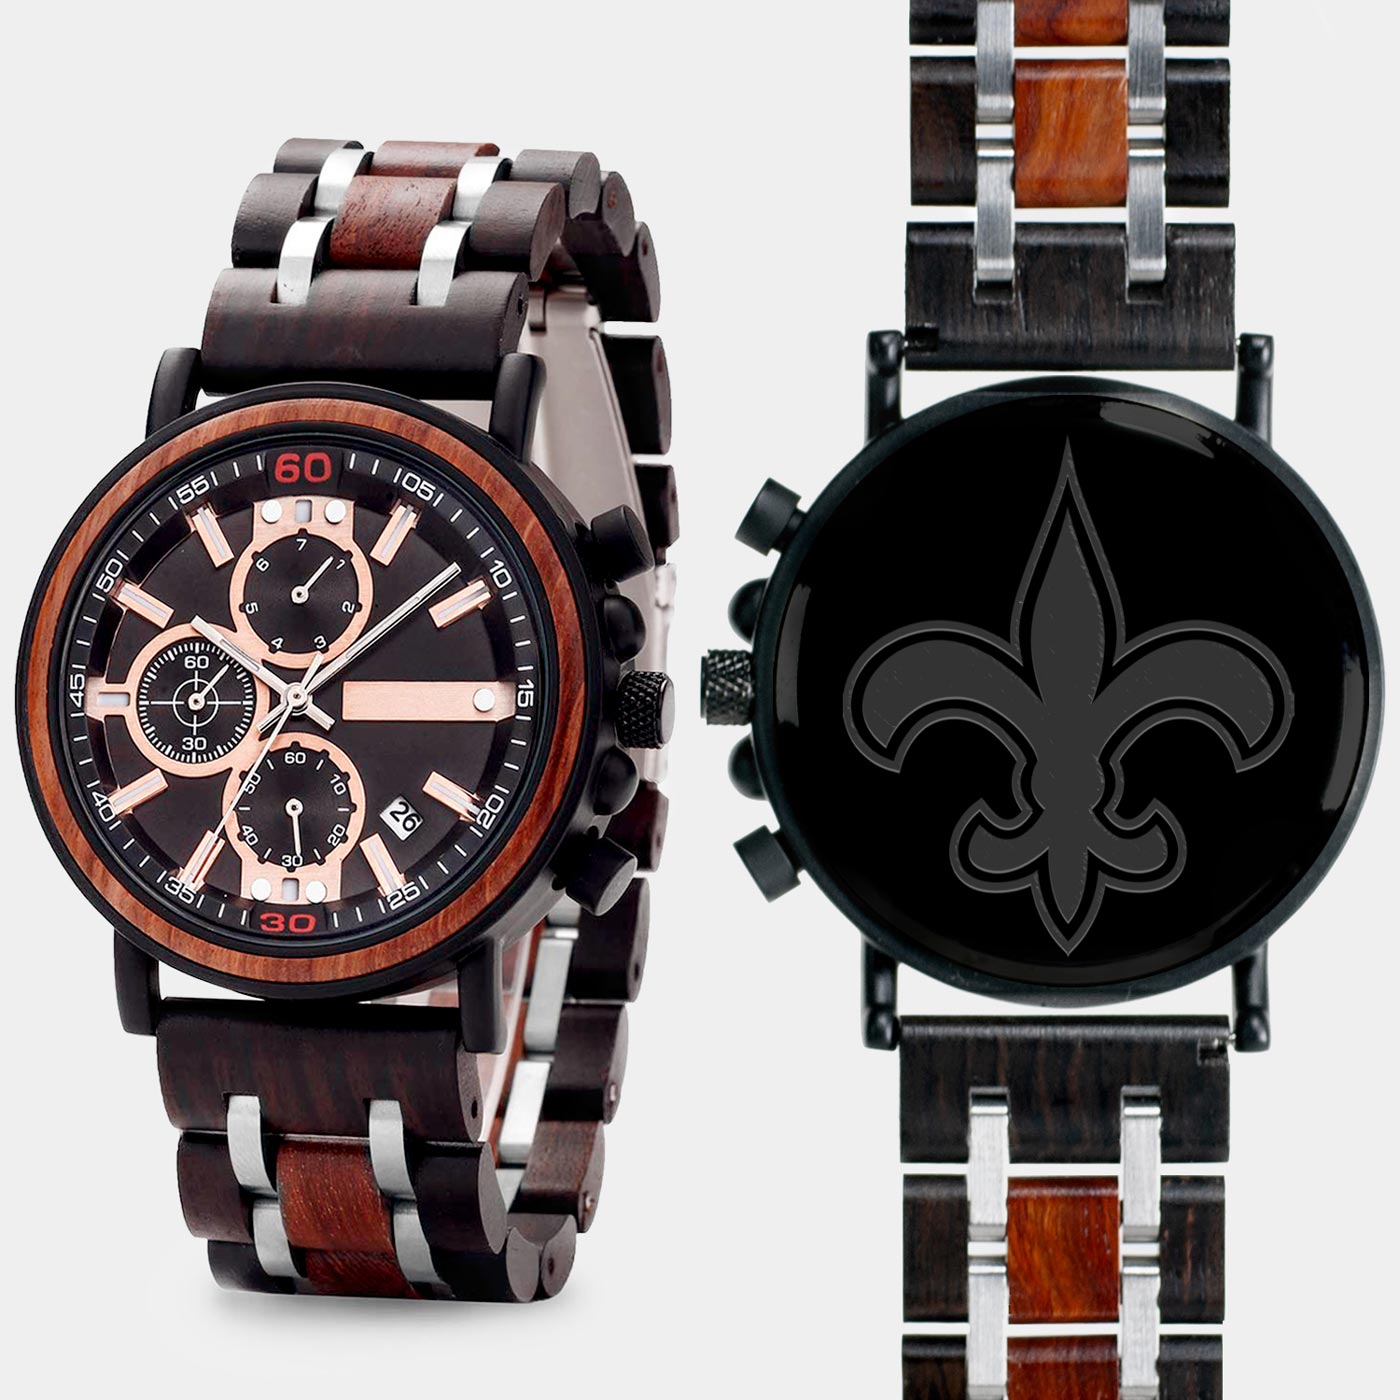 New Orleans Saints Mens Wrist Watch  - Personalized New Orleans Saints Mens Watches - Custom Gifts For Him, Birthday Gifts, Gift For Dad - Best 2022 New Orleans Saints Christmas Gifts - Black 45mm NFL Wood Watch